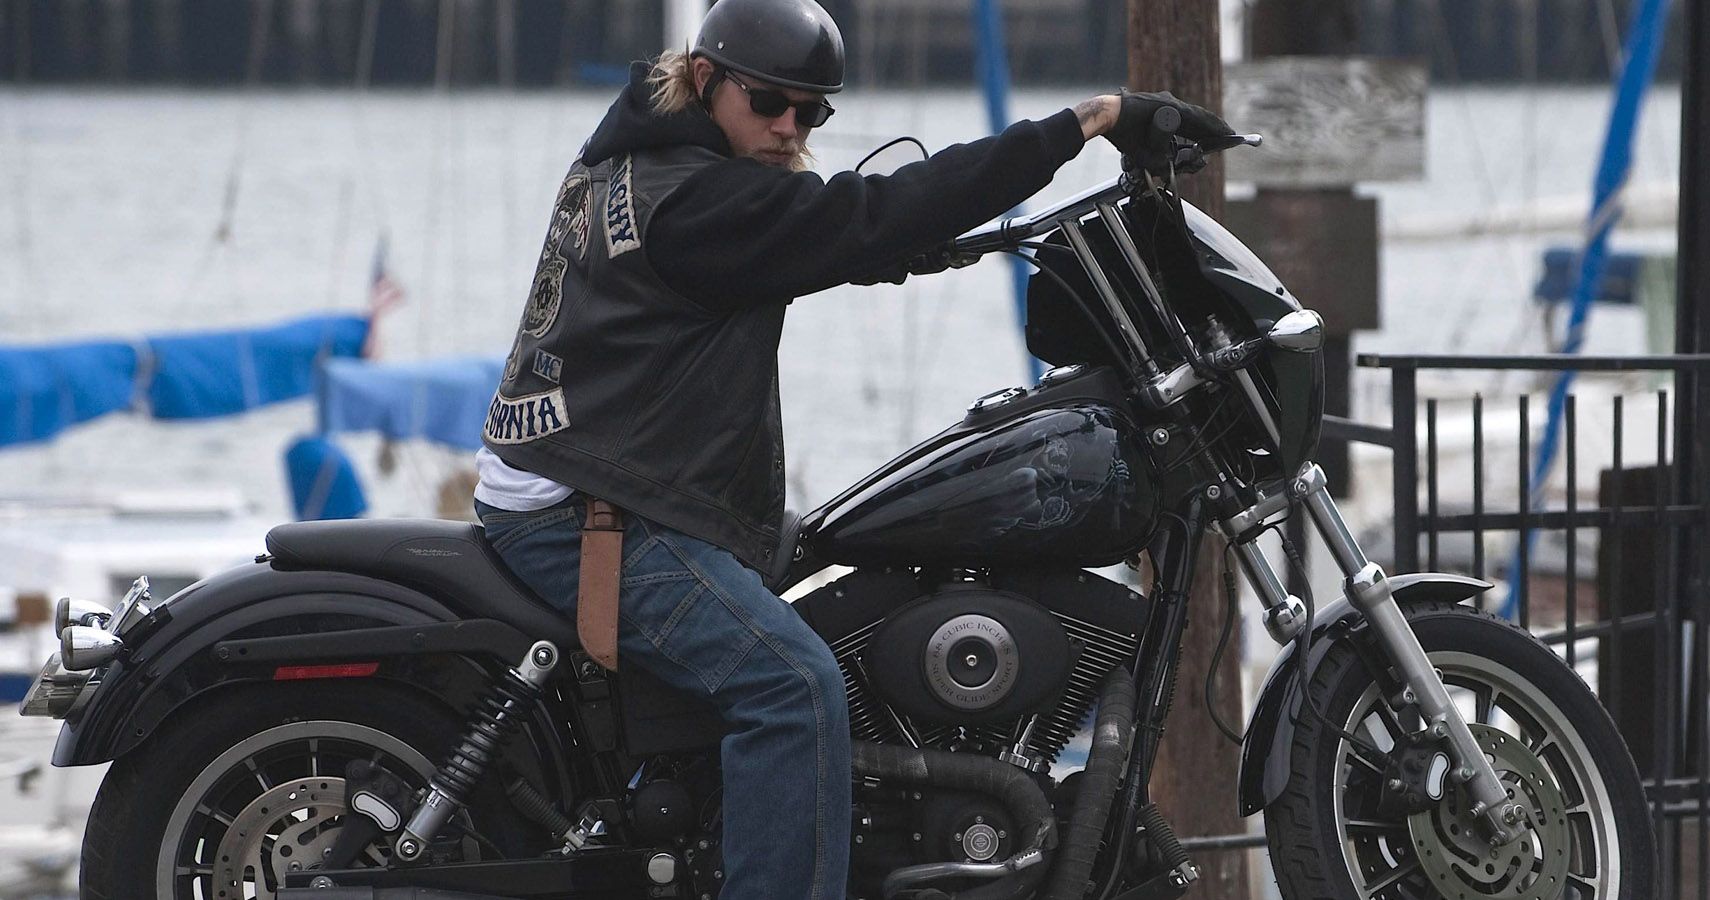 Sons Of Anarchy Motorcycles